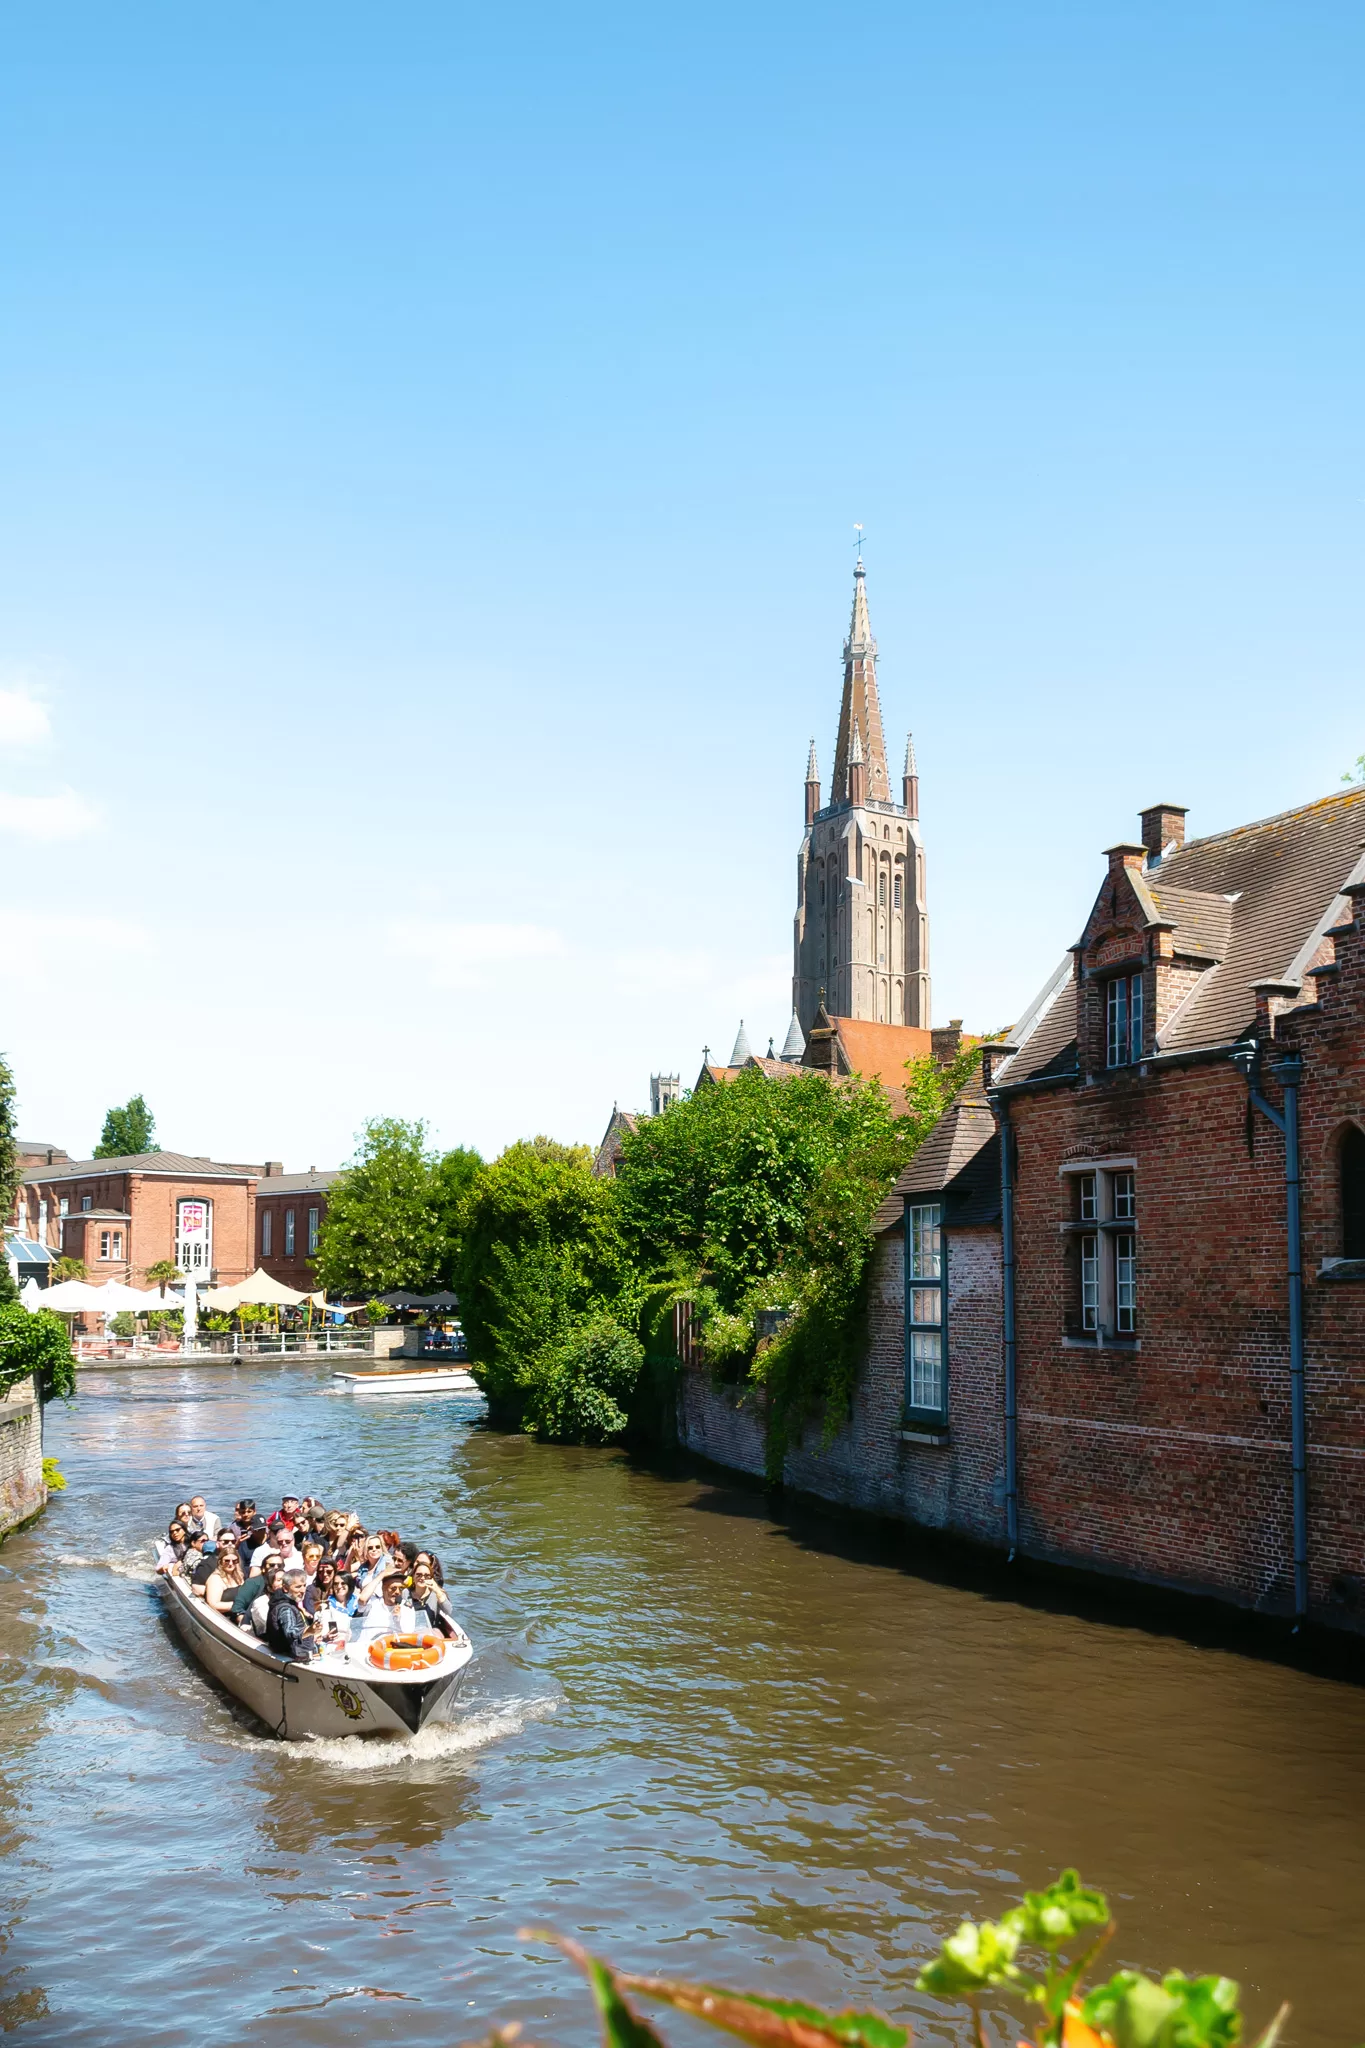 The Canals in Bruges with a canal tour boat full of people about to go under a bridge.